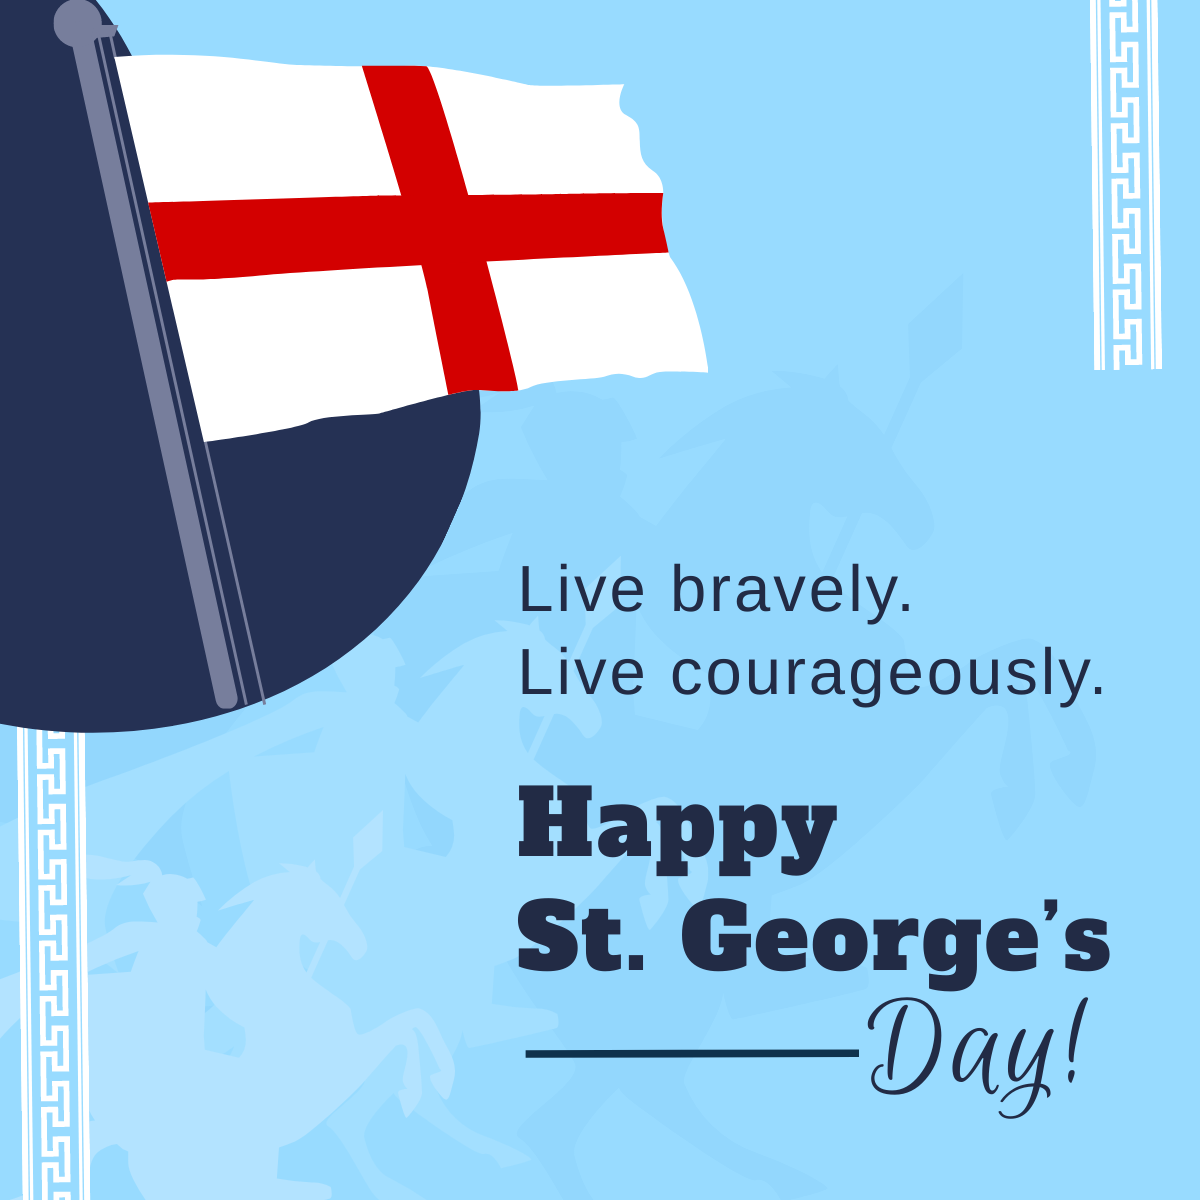 Free St. George's Day Linkedin Post Template